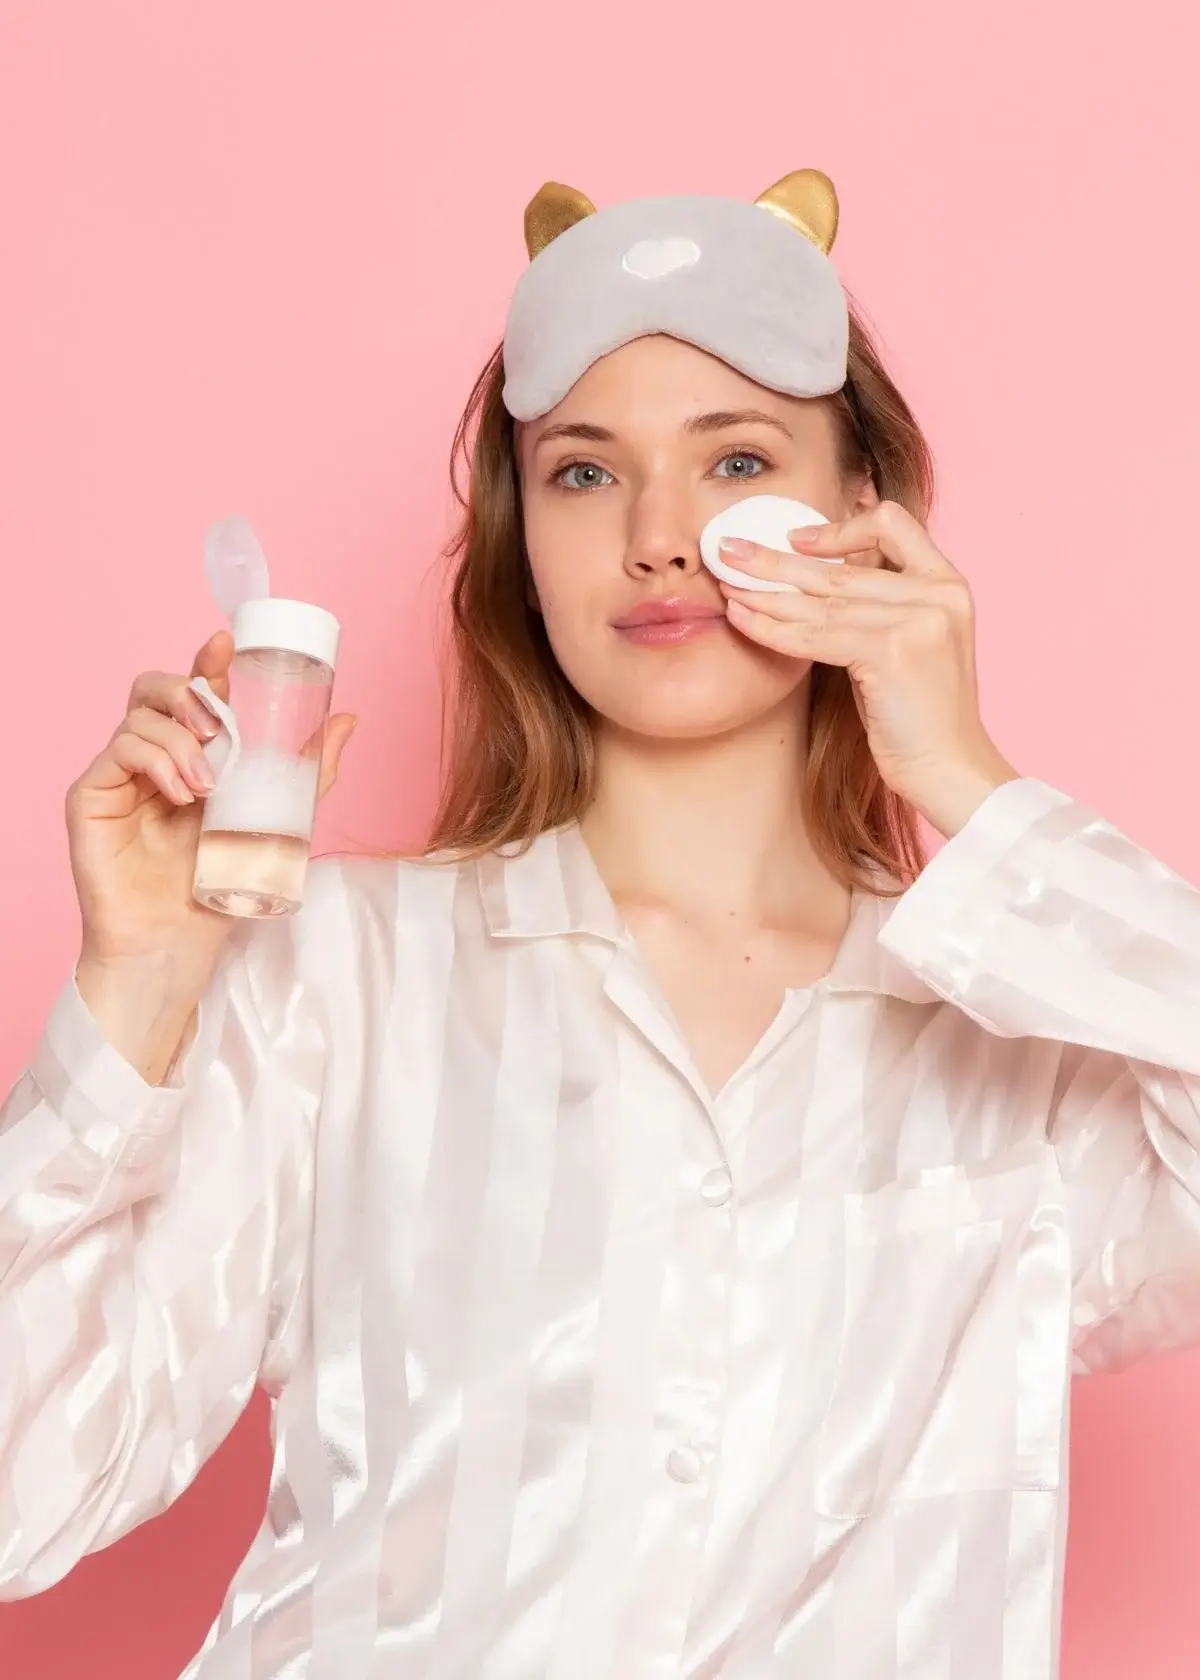 How to choose the right rose water for face?